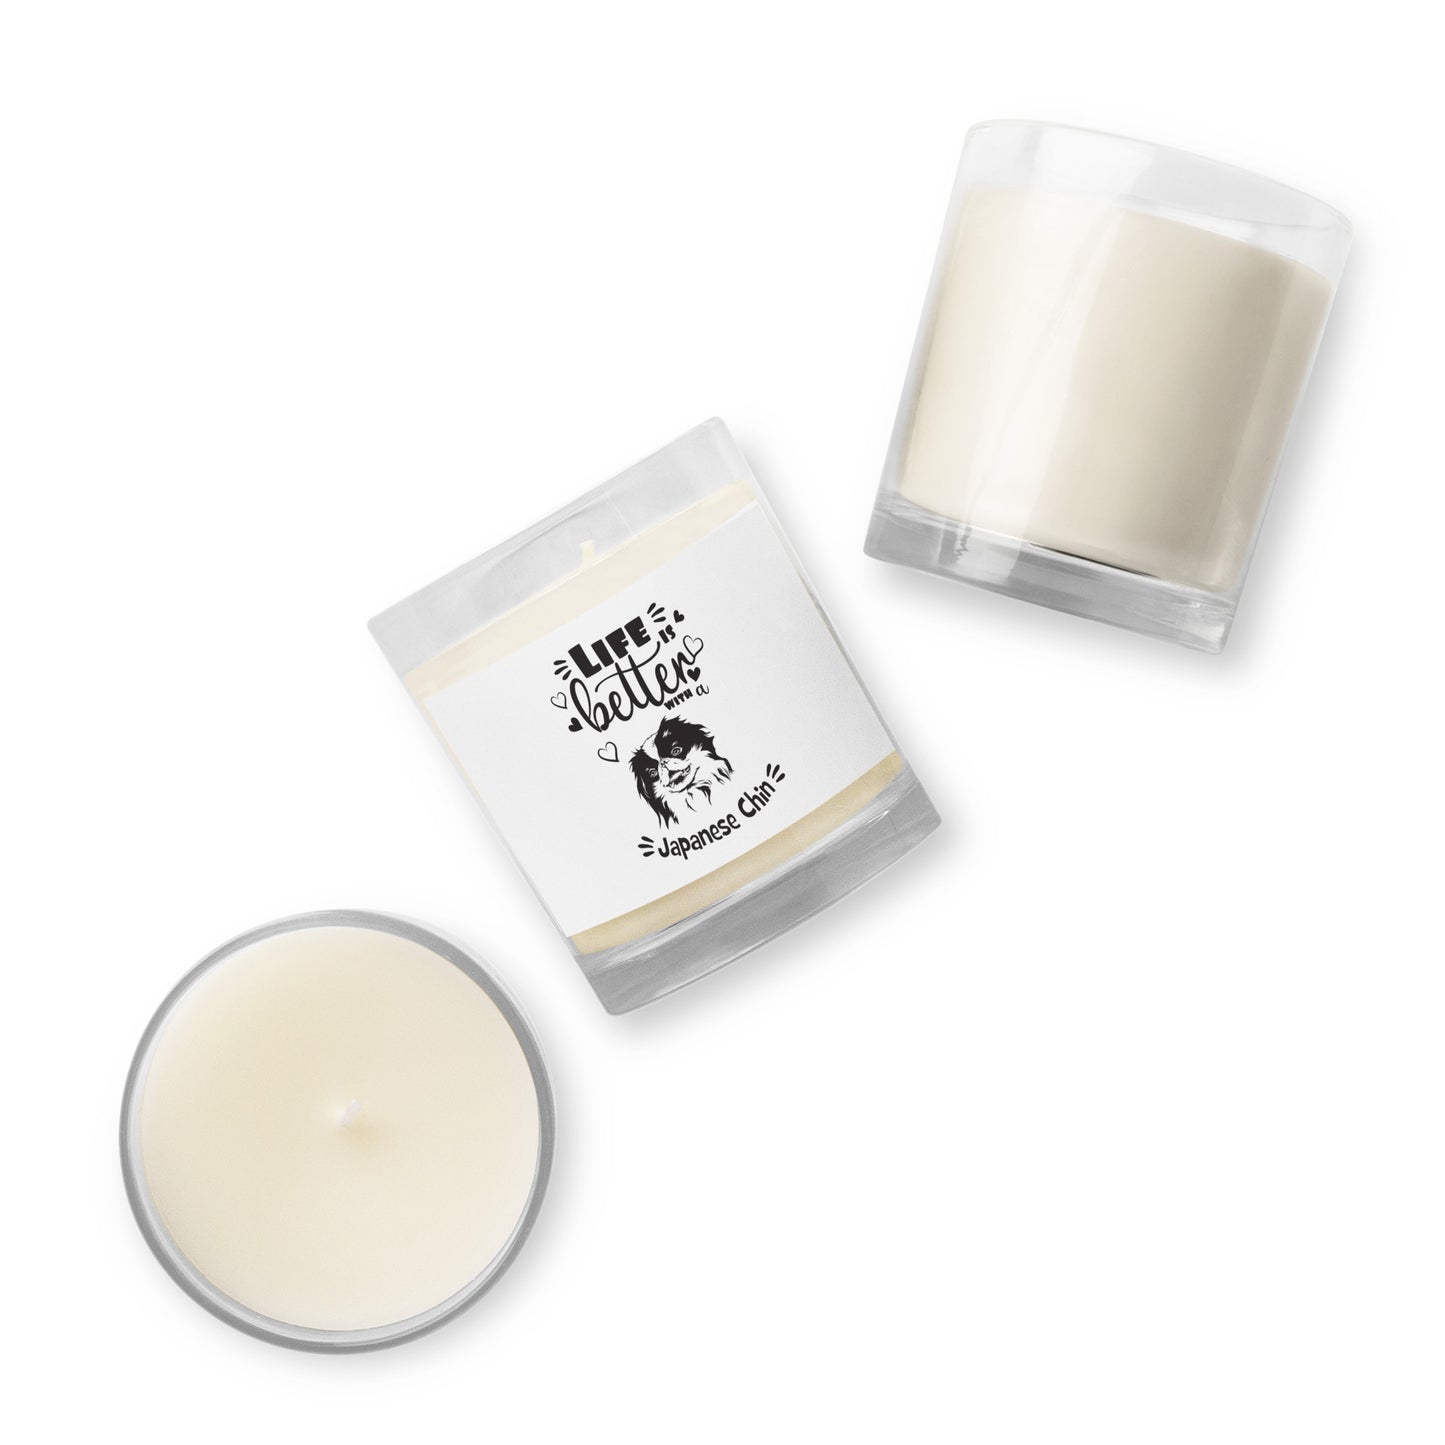 JAPANESE CHIN Glass jar soy wax candle